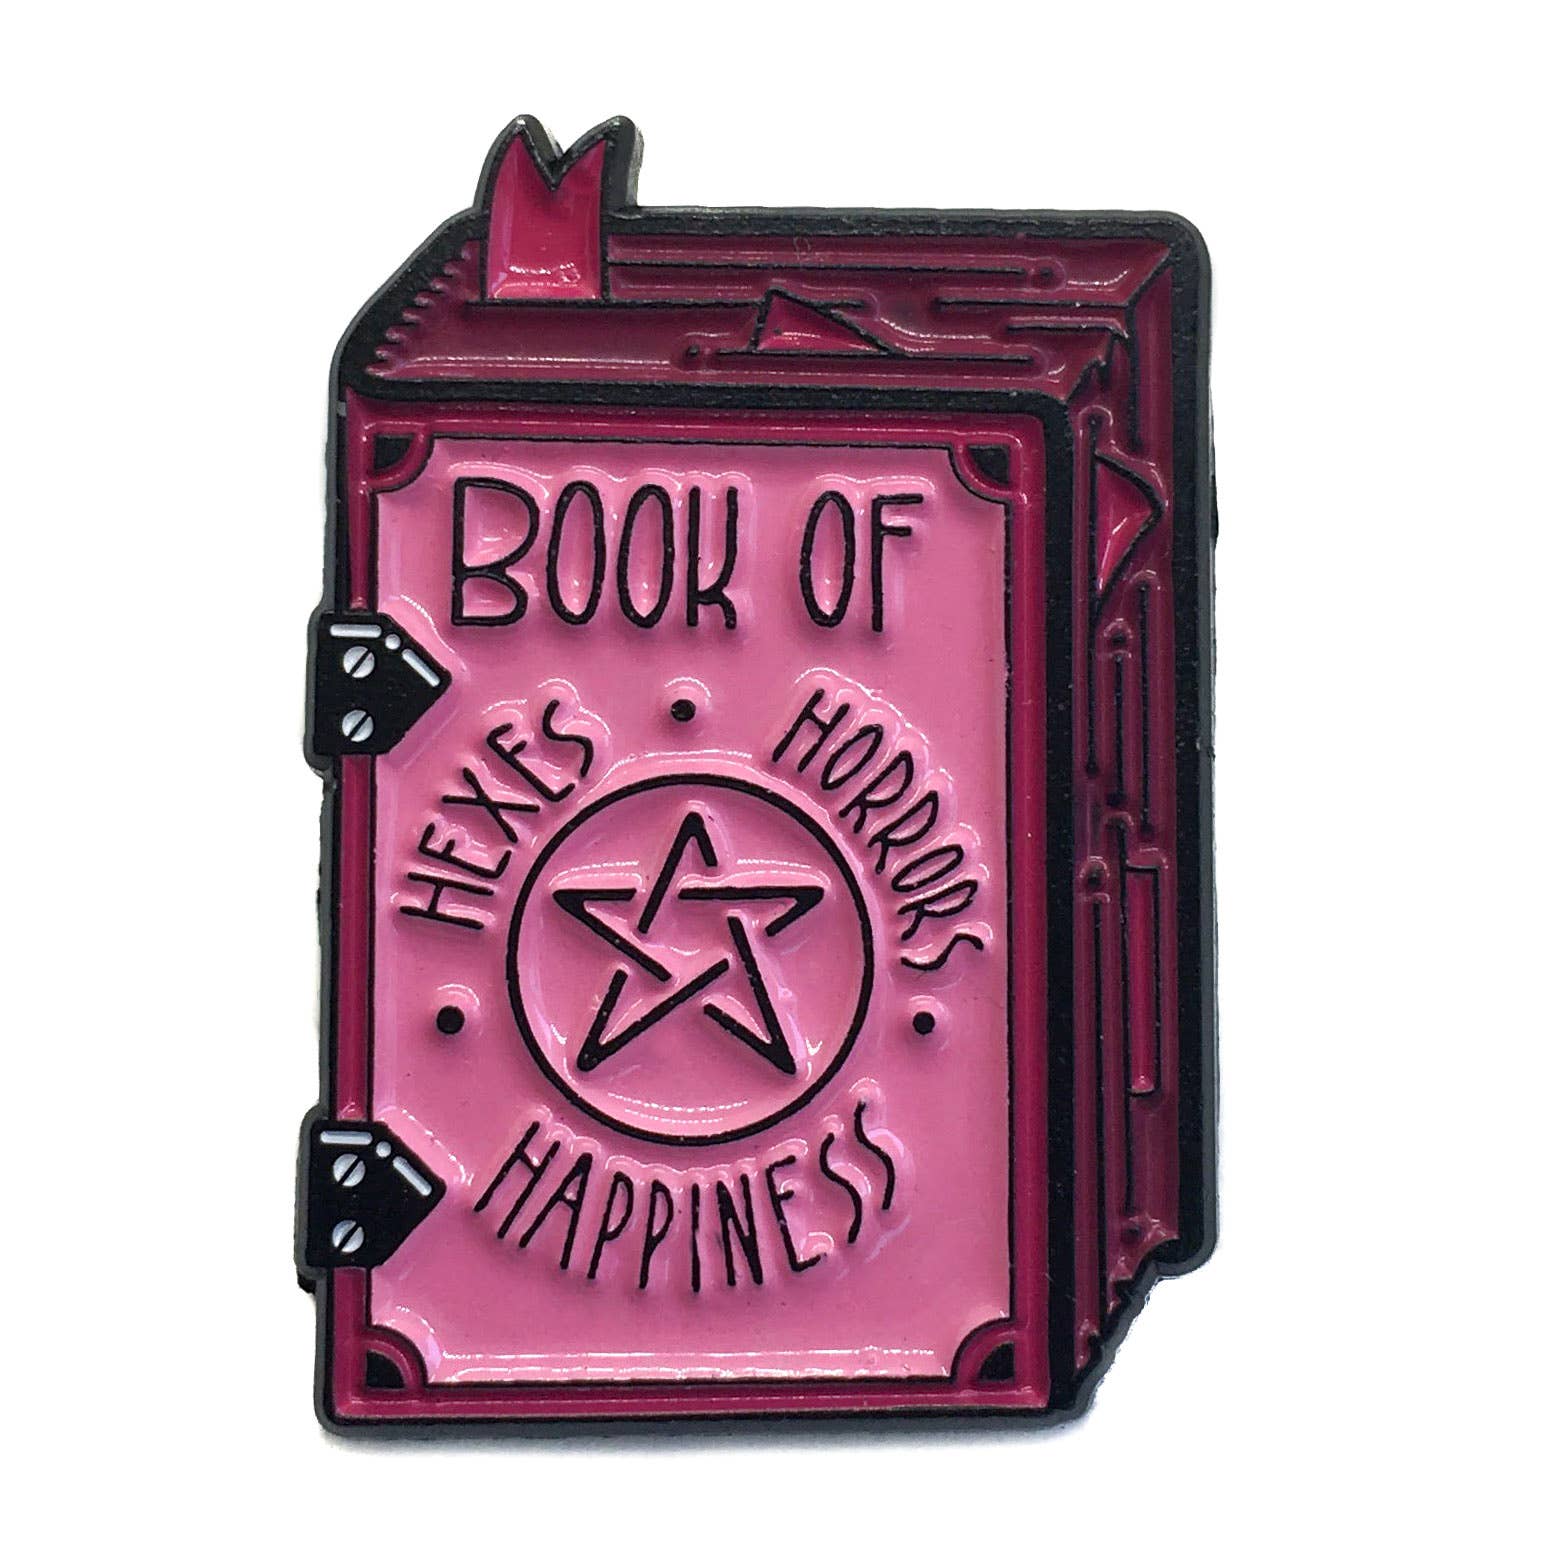 "Book of Hexes, Horrors, and Happiness" Grimoire Enamel Pin - Lolita Collective